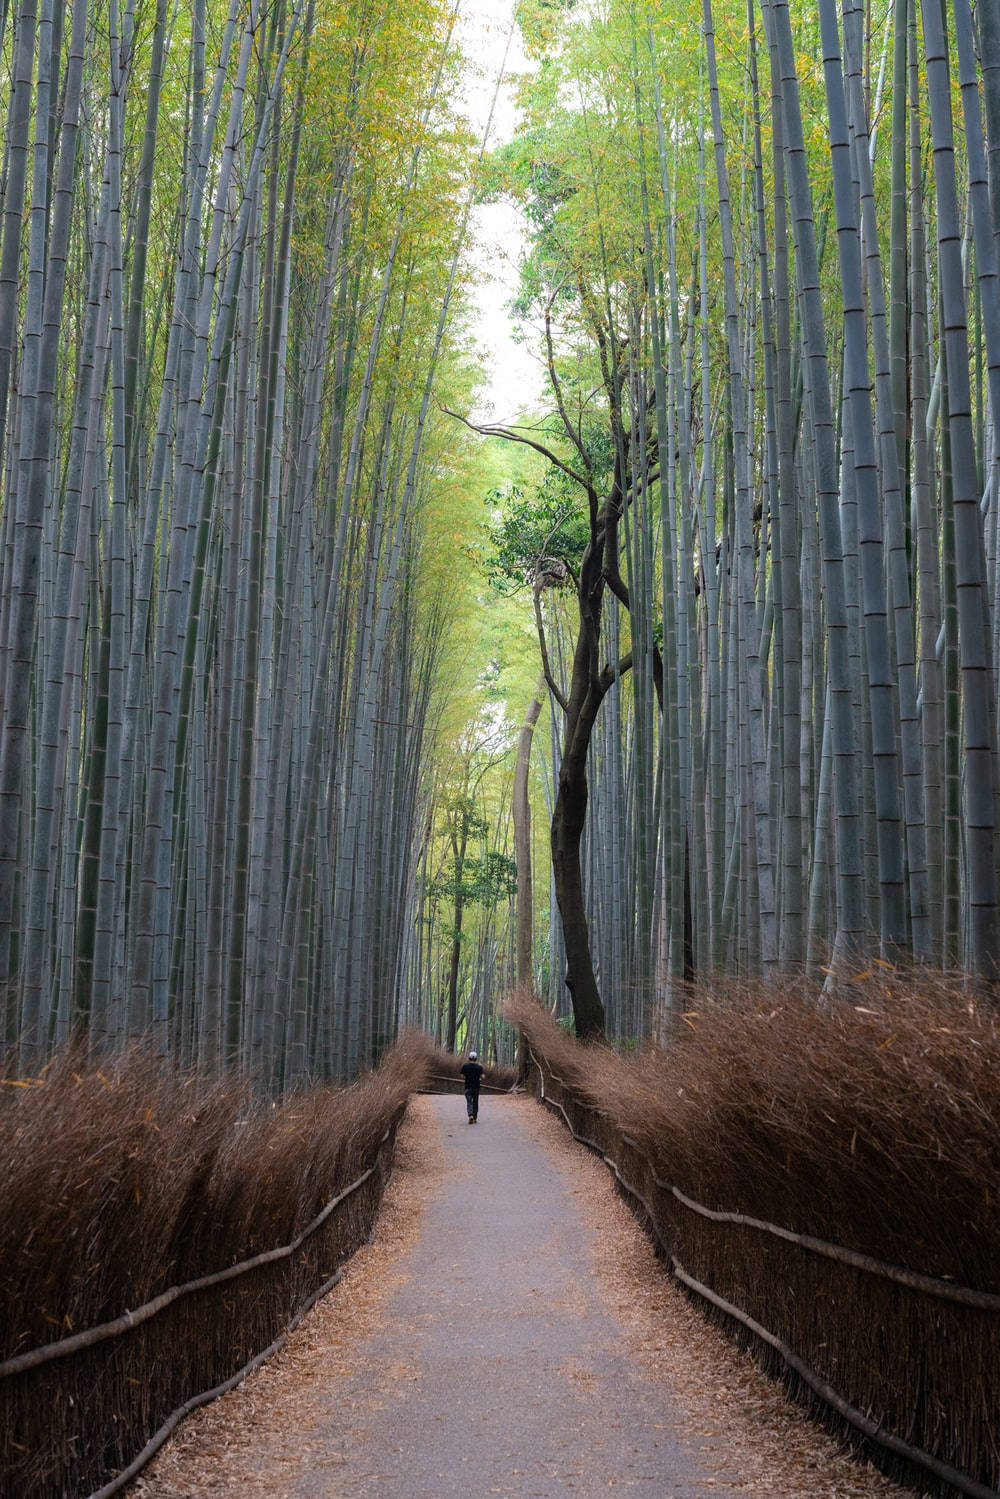 Japanese Bamboo Forest IPhone Wallpaper